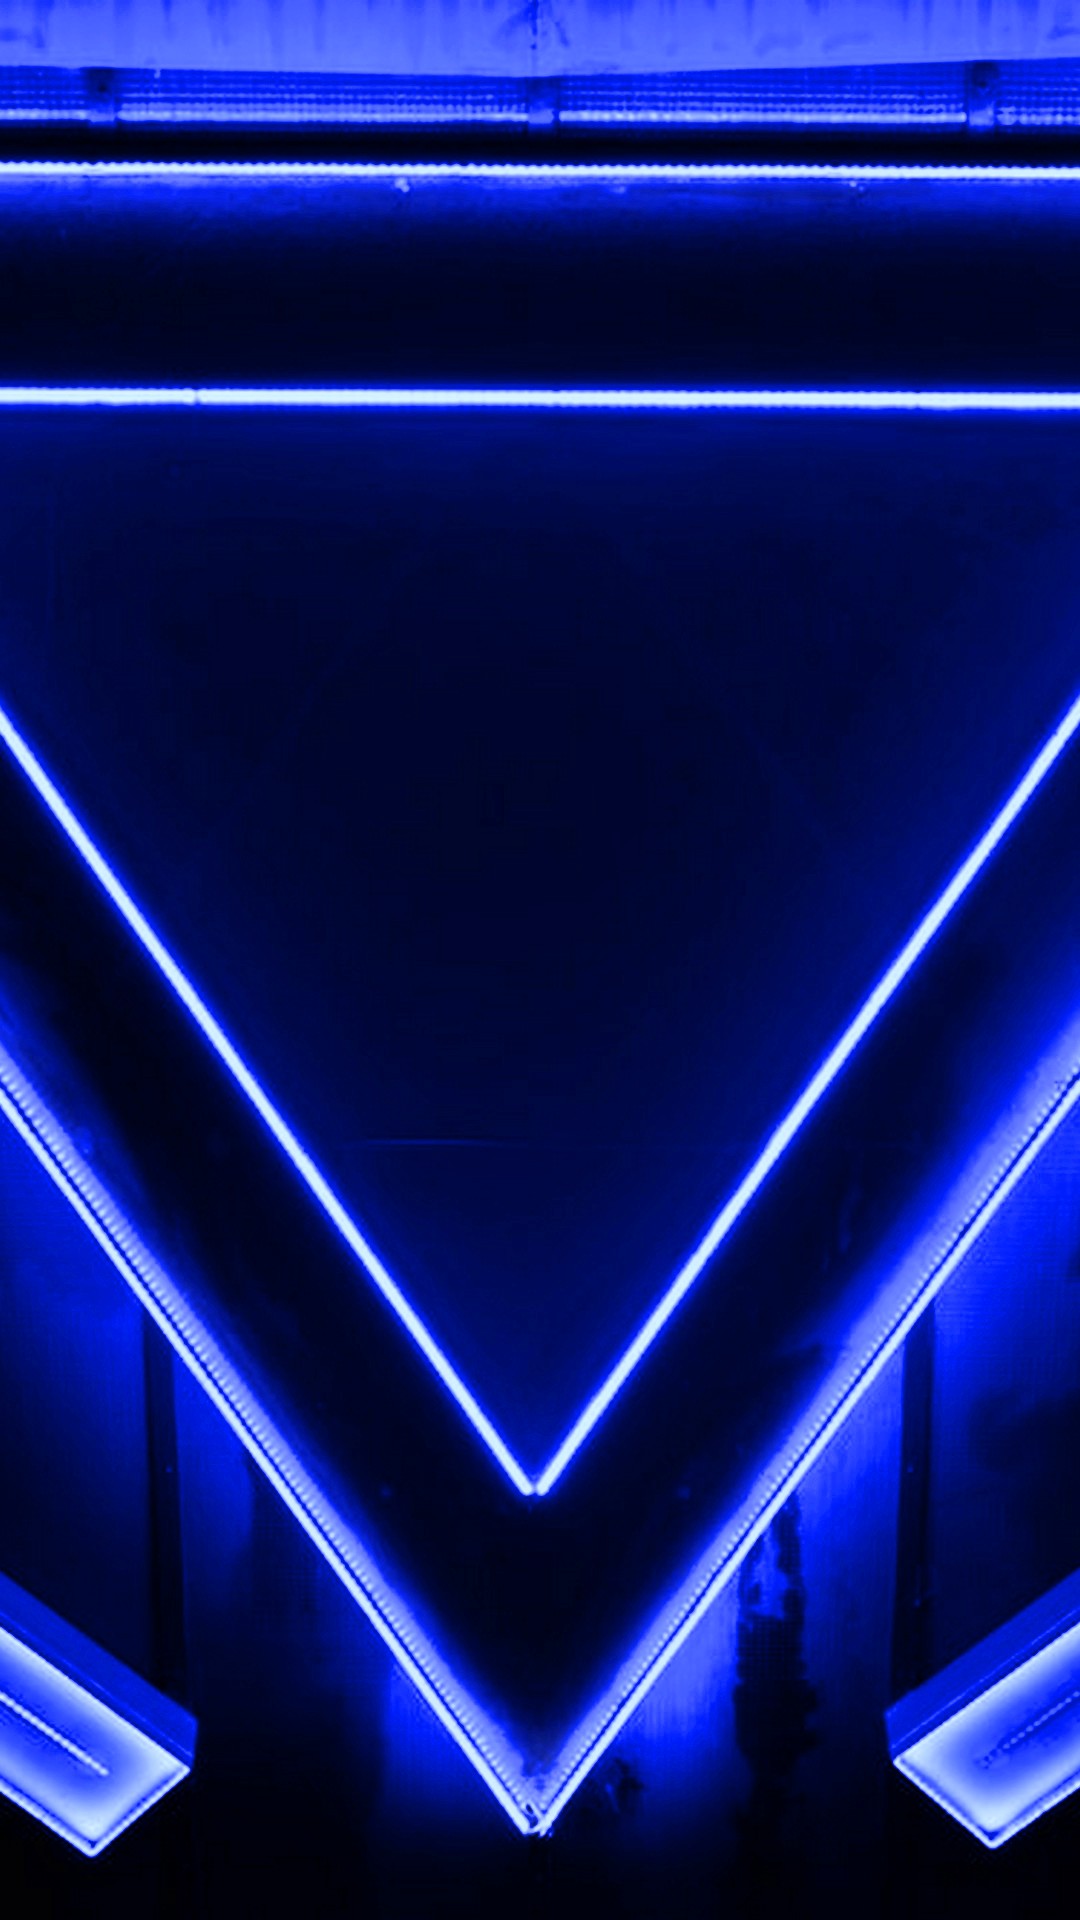 Blue Neon iPhone X Wallpaper HD with high-resolution 1080x1920 pixel. Download all Mobile Wallpapers and Use them as wallpapers for your iPhone, Tablet, iPad, Android and other mobile devices